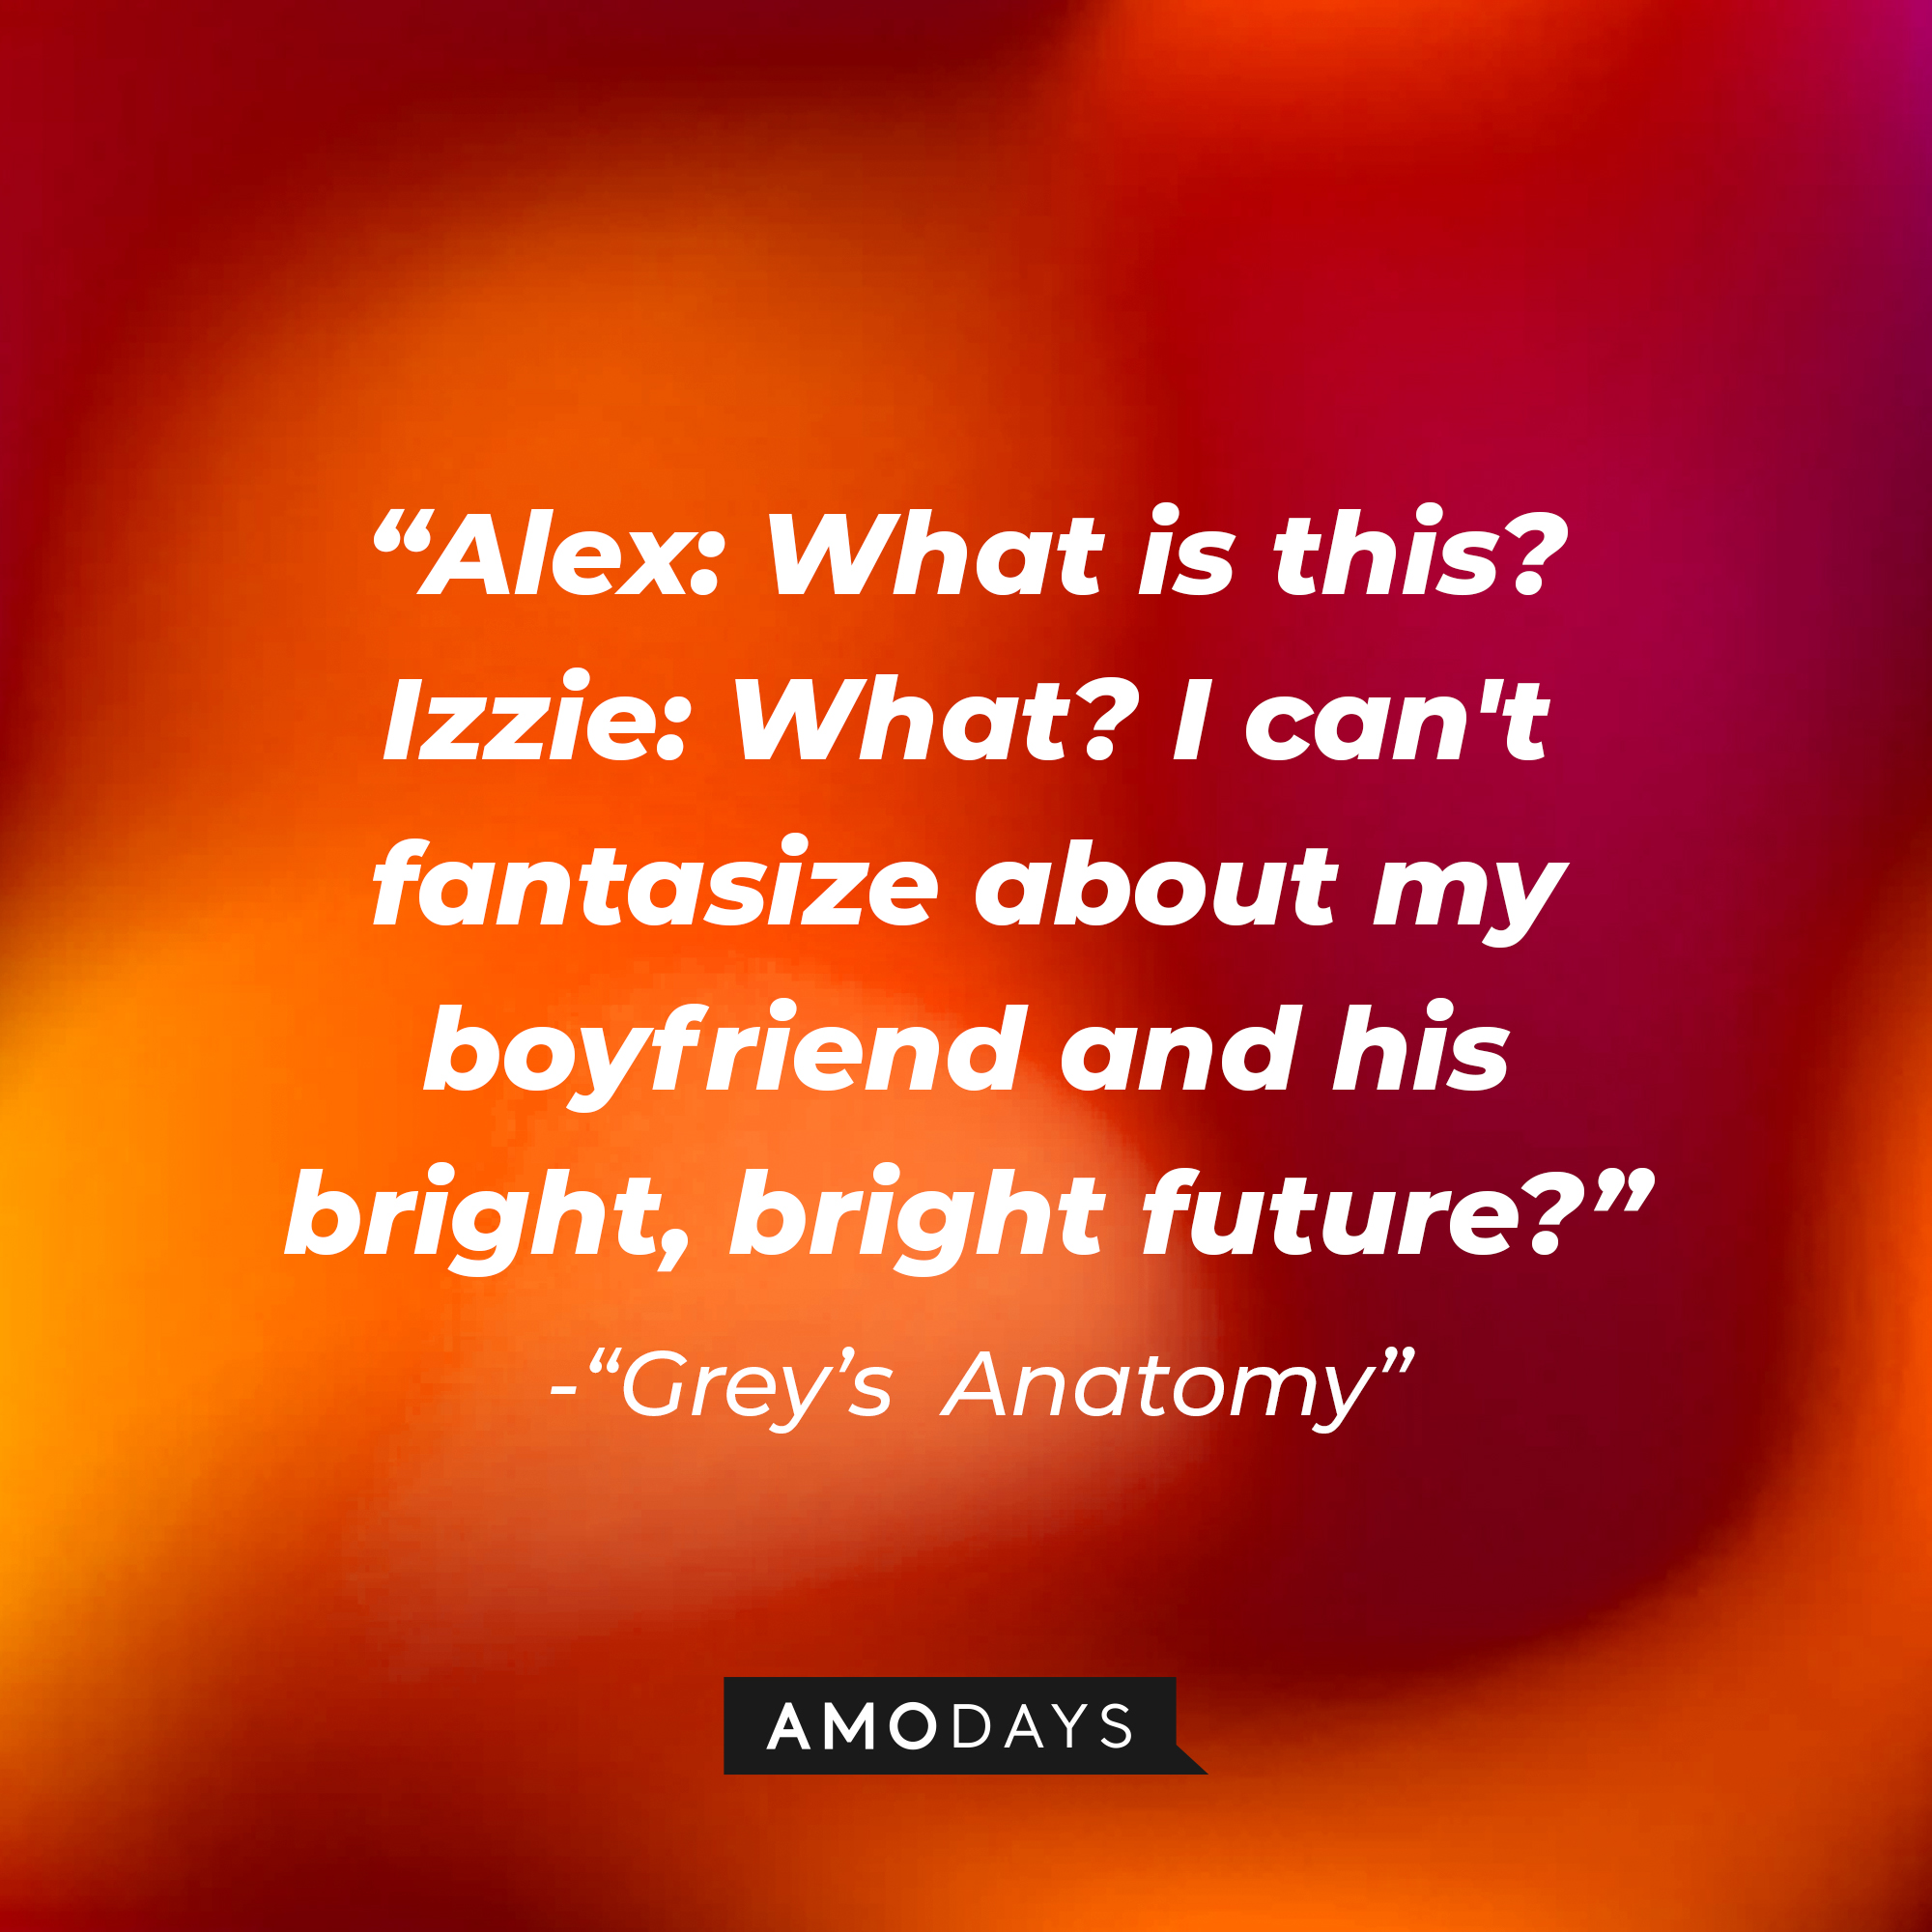 Alex's quote: "What is this?" Izzie: :What? I can't fantasize about my boyfriend and his bright, bright future? | Image: Amodays